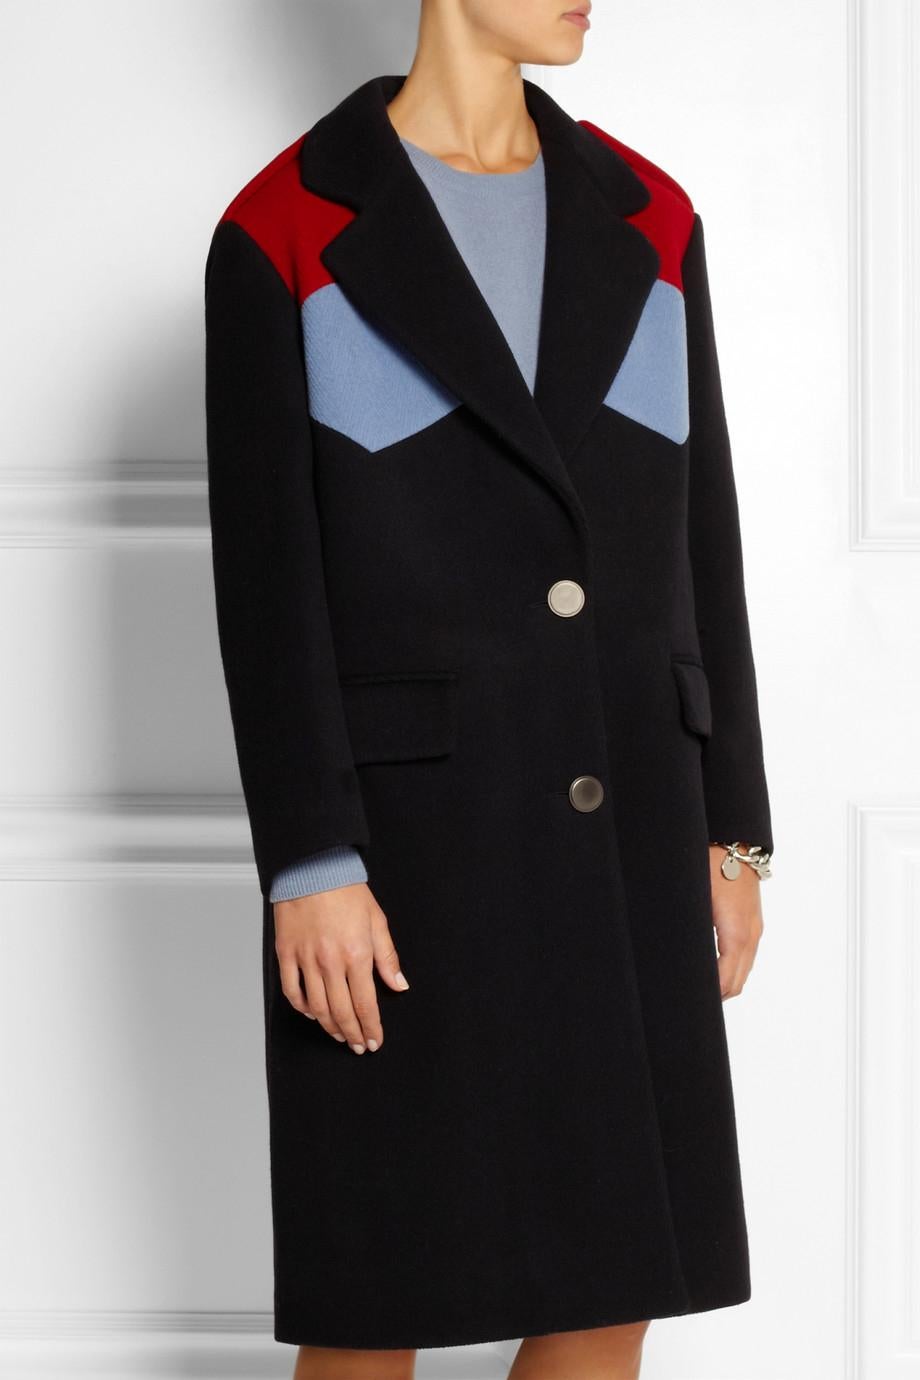 Miu Miu Navy/Light Blue & Red Color Block Wool Coat Sz IT36

Made In: Italy
Year of Production: 2014
Color: Navy/Light Blue & Red
Materials: 100% virgin wool, hood- 100% nylon, 
Lining: 100% viscose, interlining- 100% polyester
Opening/Closure: